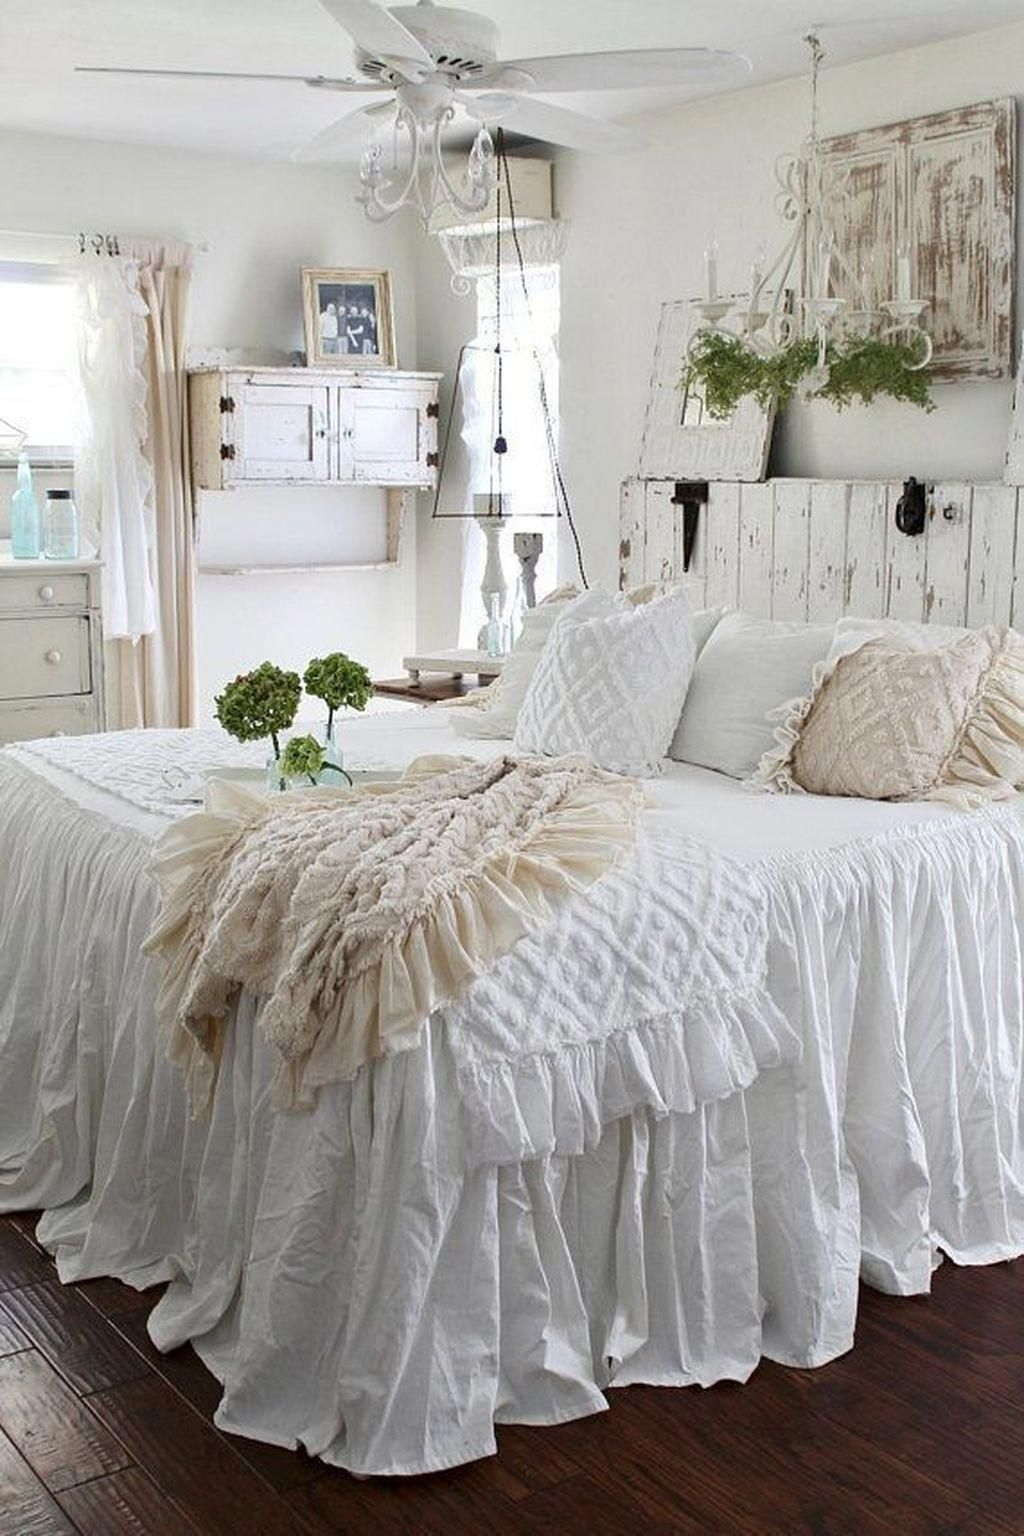 Shabby Chic Bedroom Pictures
 23 Most Beautiful Shabby Chic Bedroom Ideas